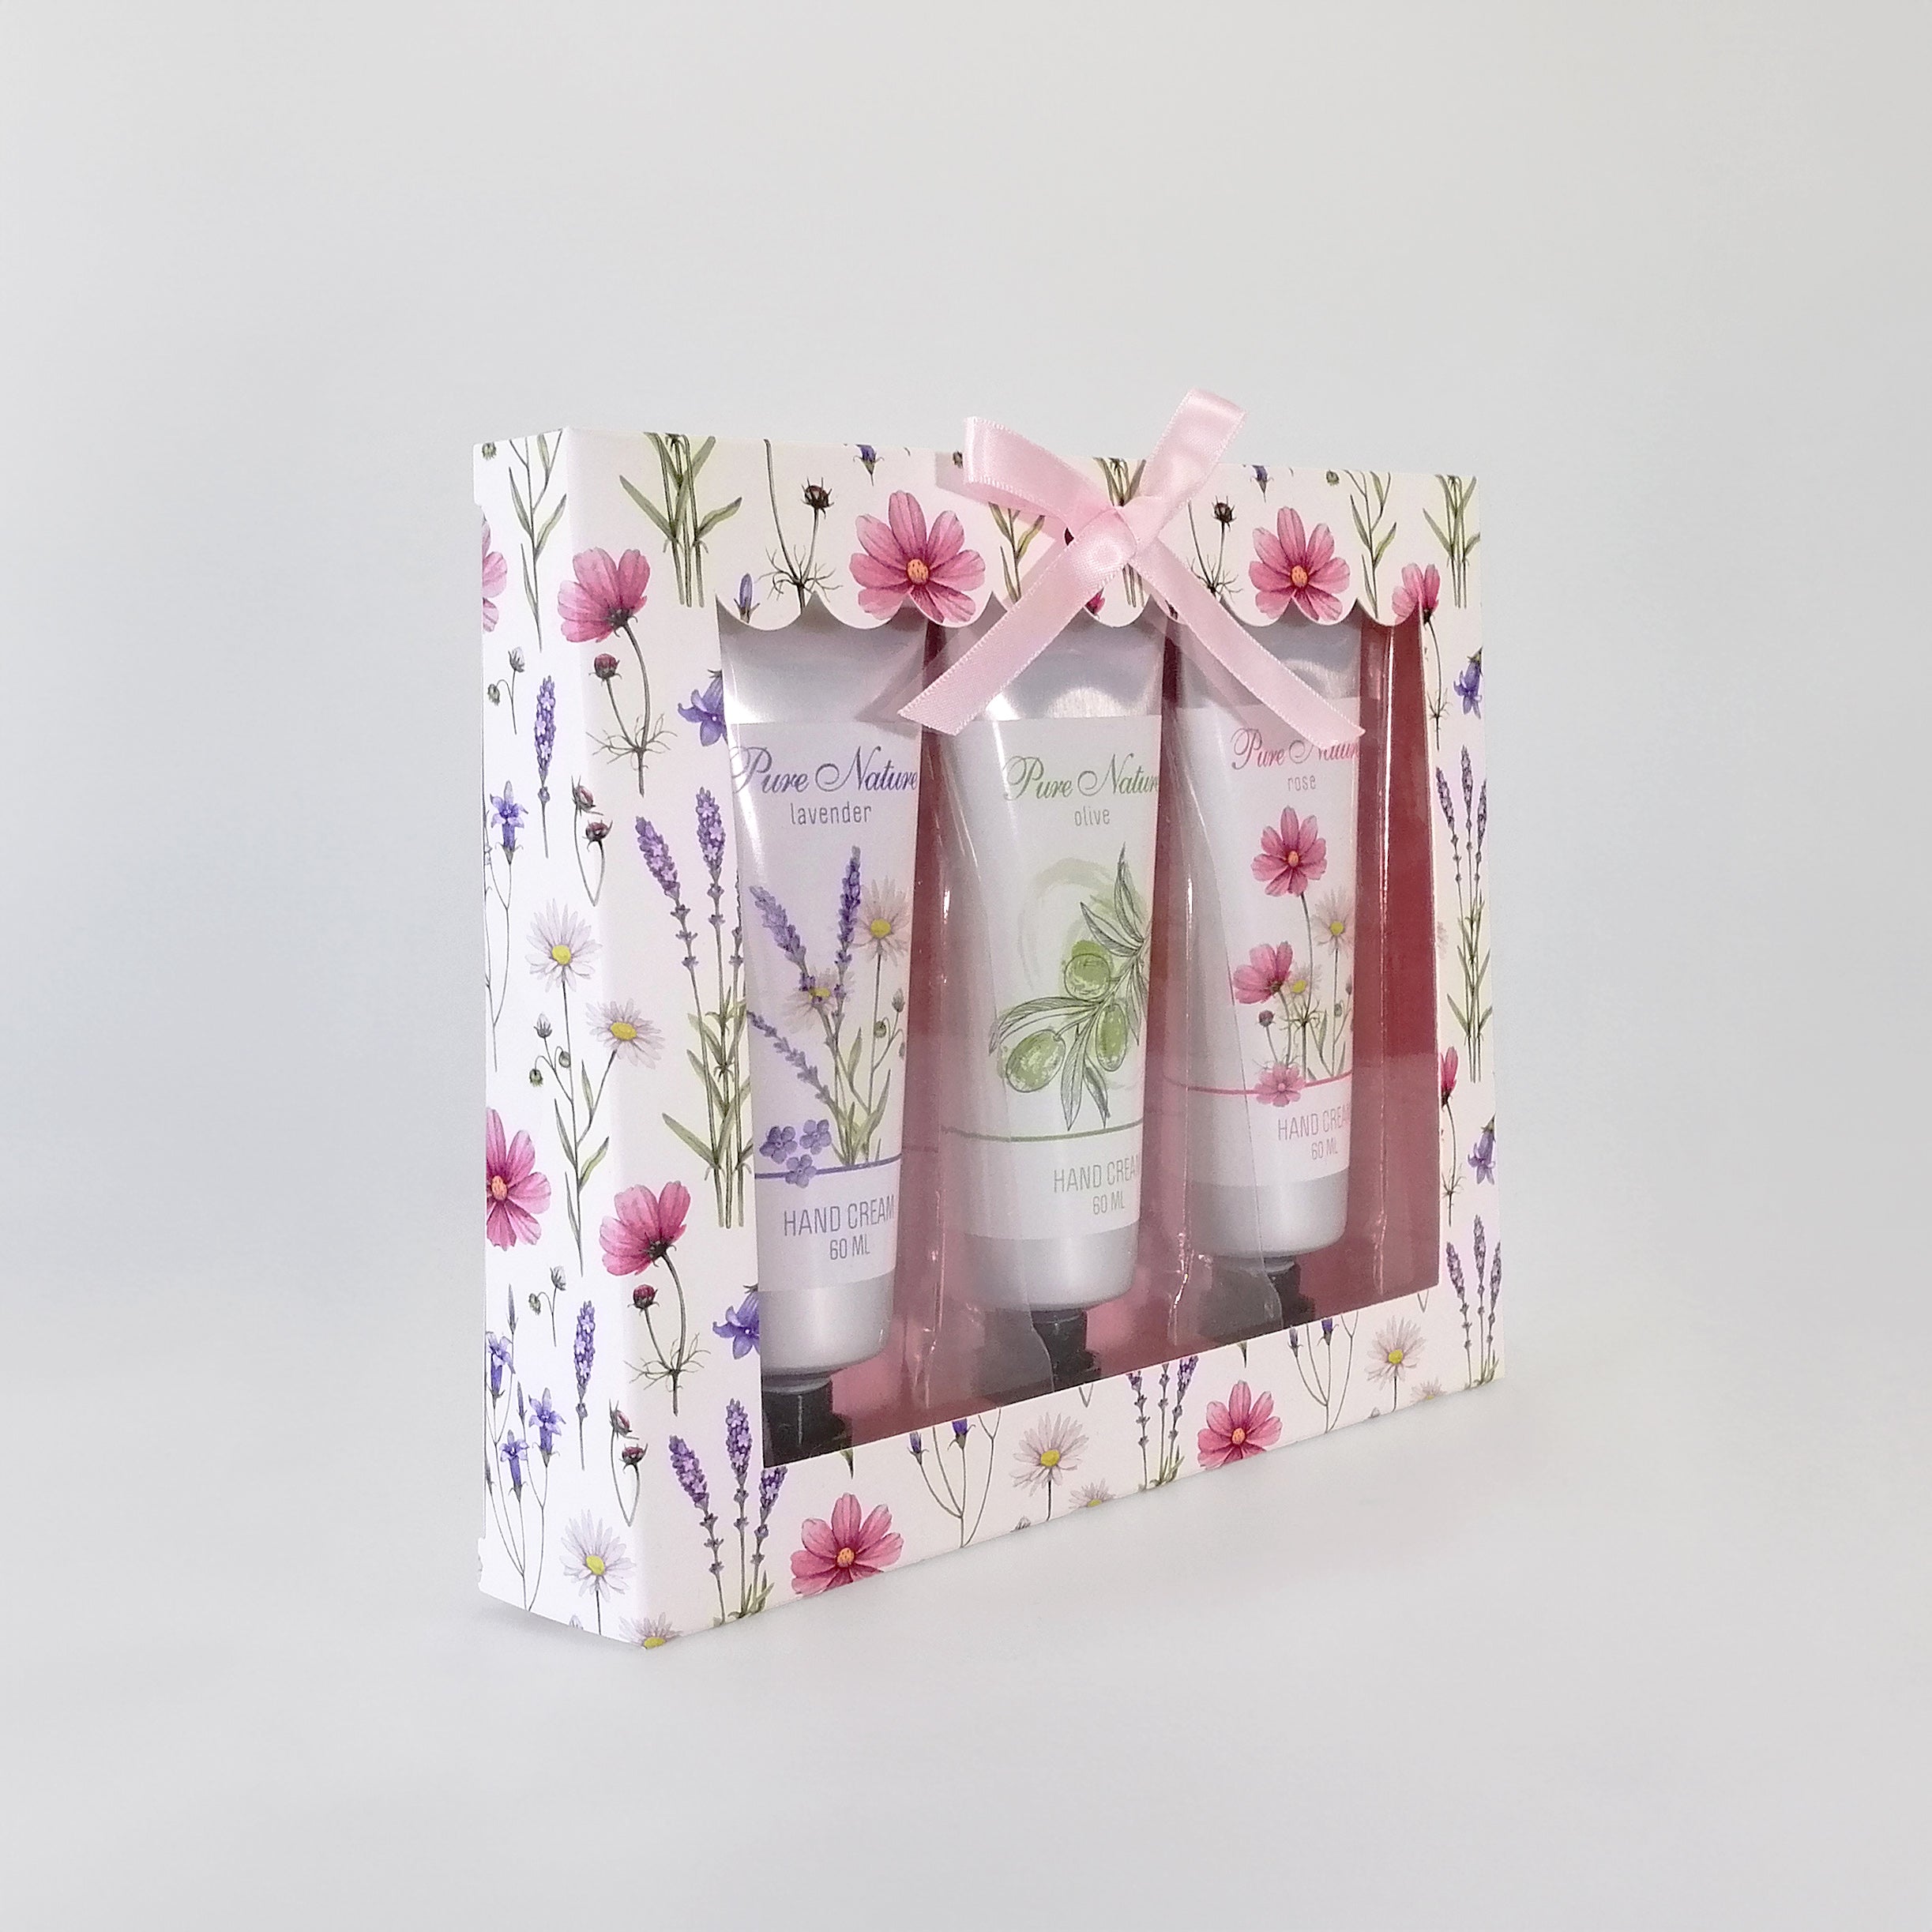 Pure Nature - Floral Hand Cream Gift Set - Lavender, Olive, and Rose